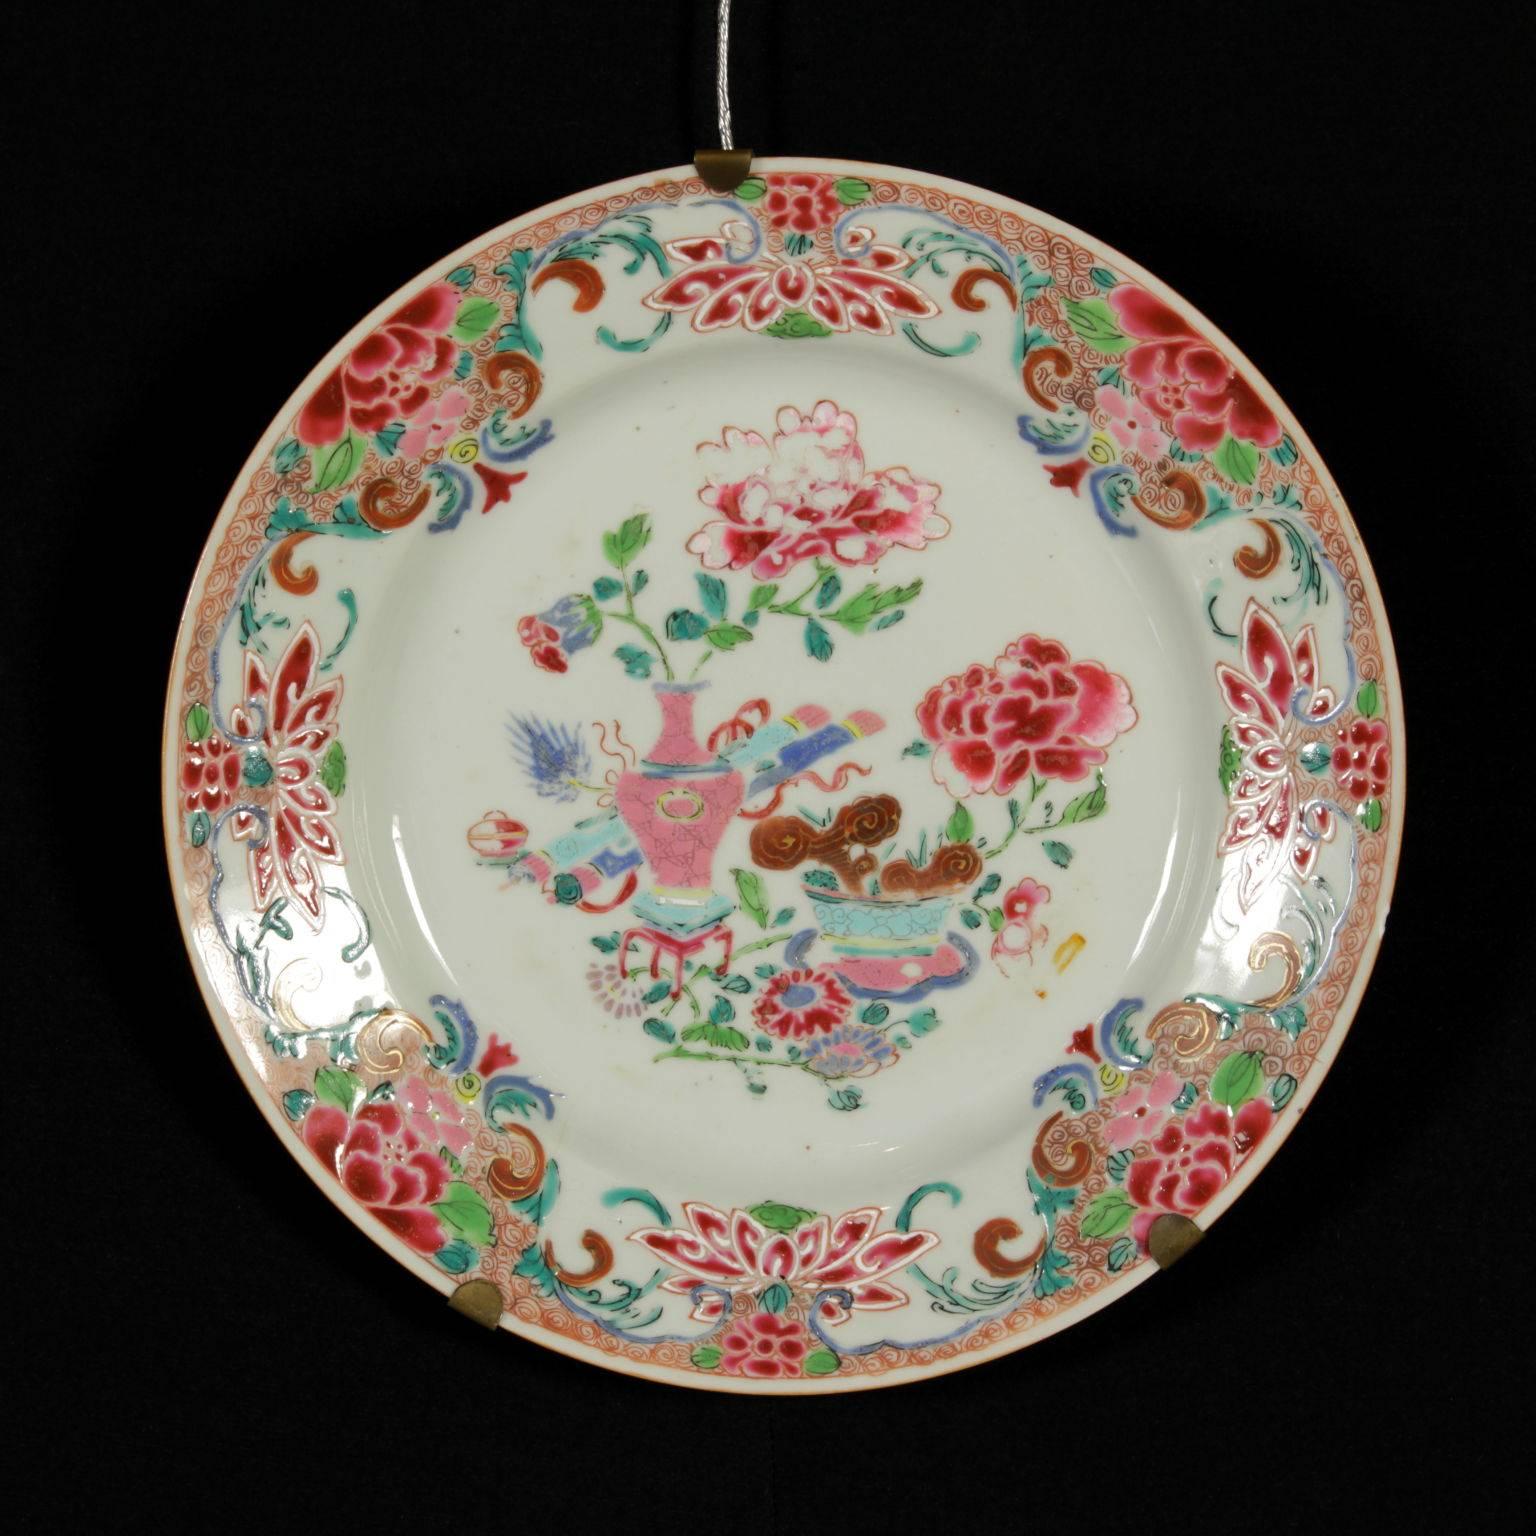 A group of six 'Famille rose' plates made of Chinese porcelain decorated with polychrome glazes. In the middle, a composition with an ancient vase full of peonies, two rolls and a vase with Lingzhi mushrooms. The perimeter is decorated with